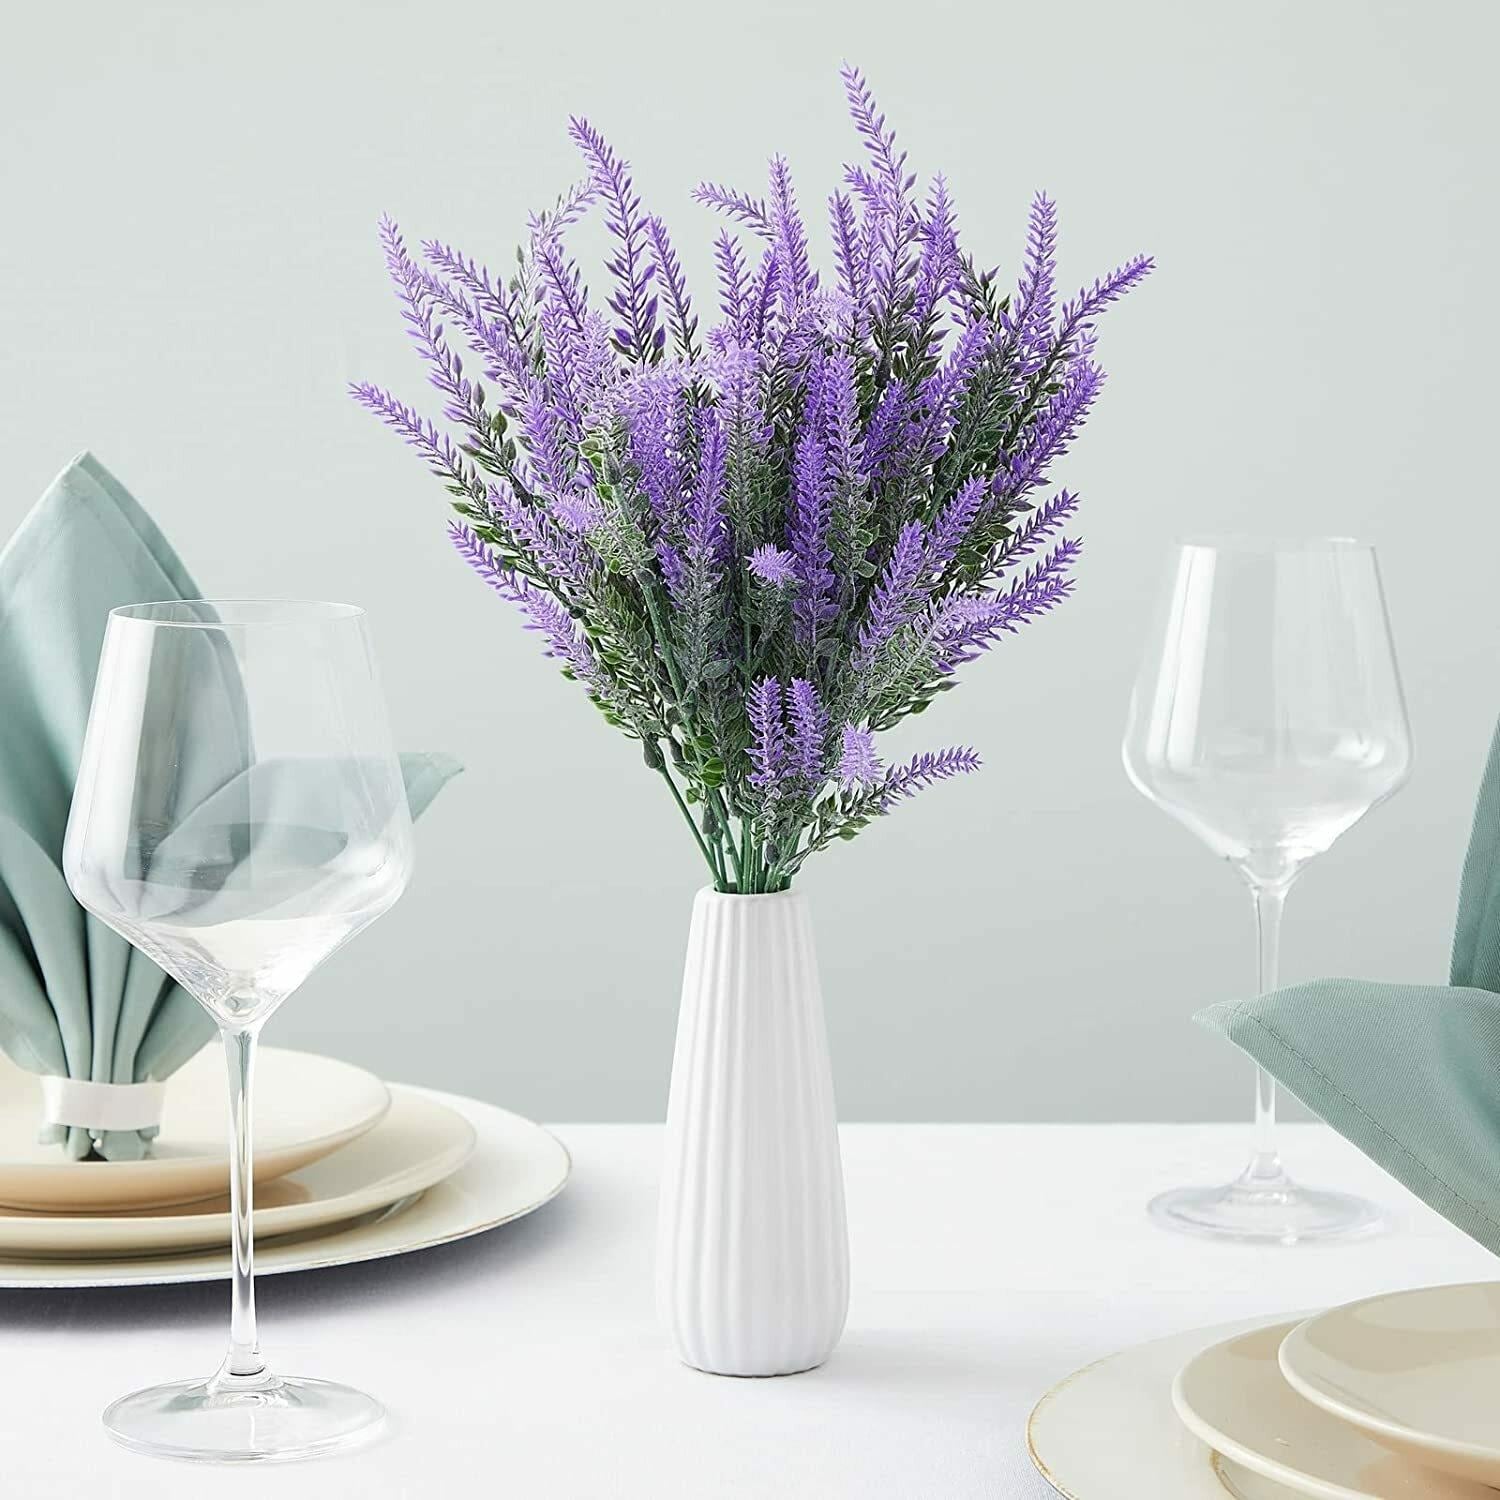 lavender artificial flowers from gardengreen, gardengreen best choice for artificial lavender flowers.